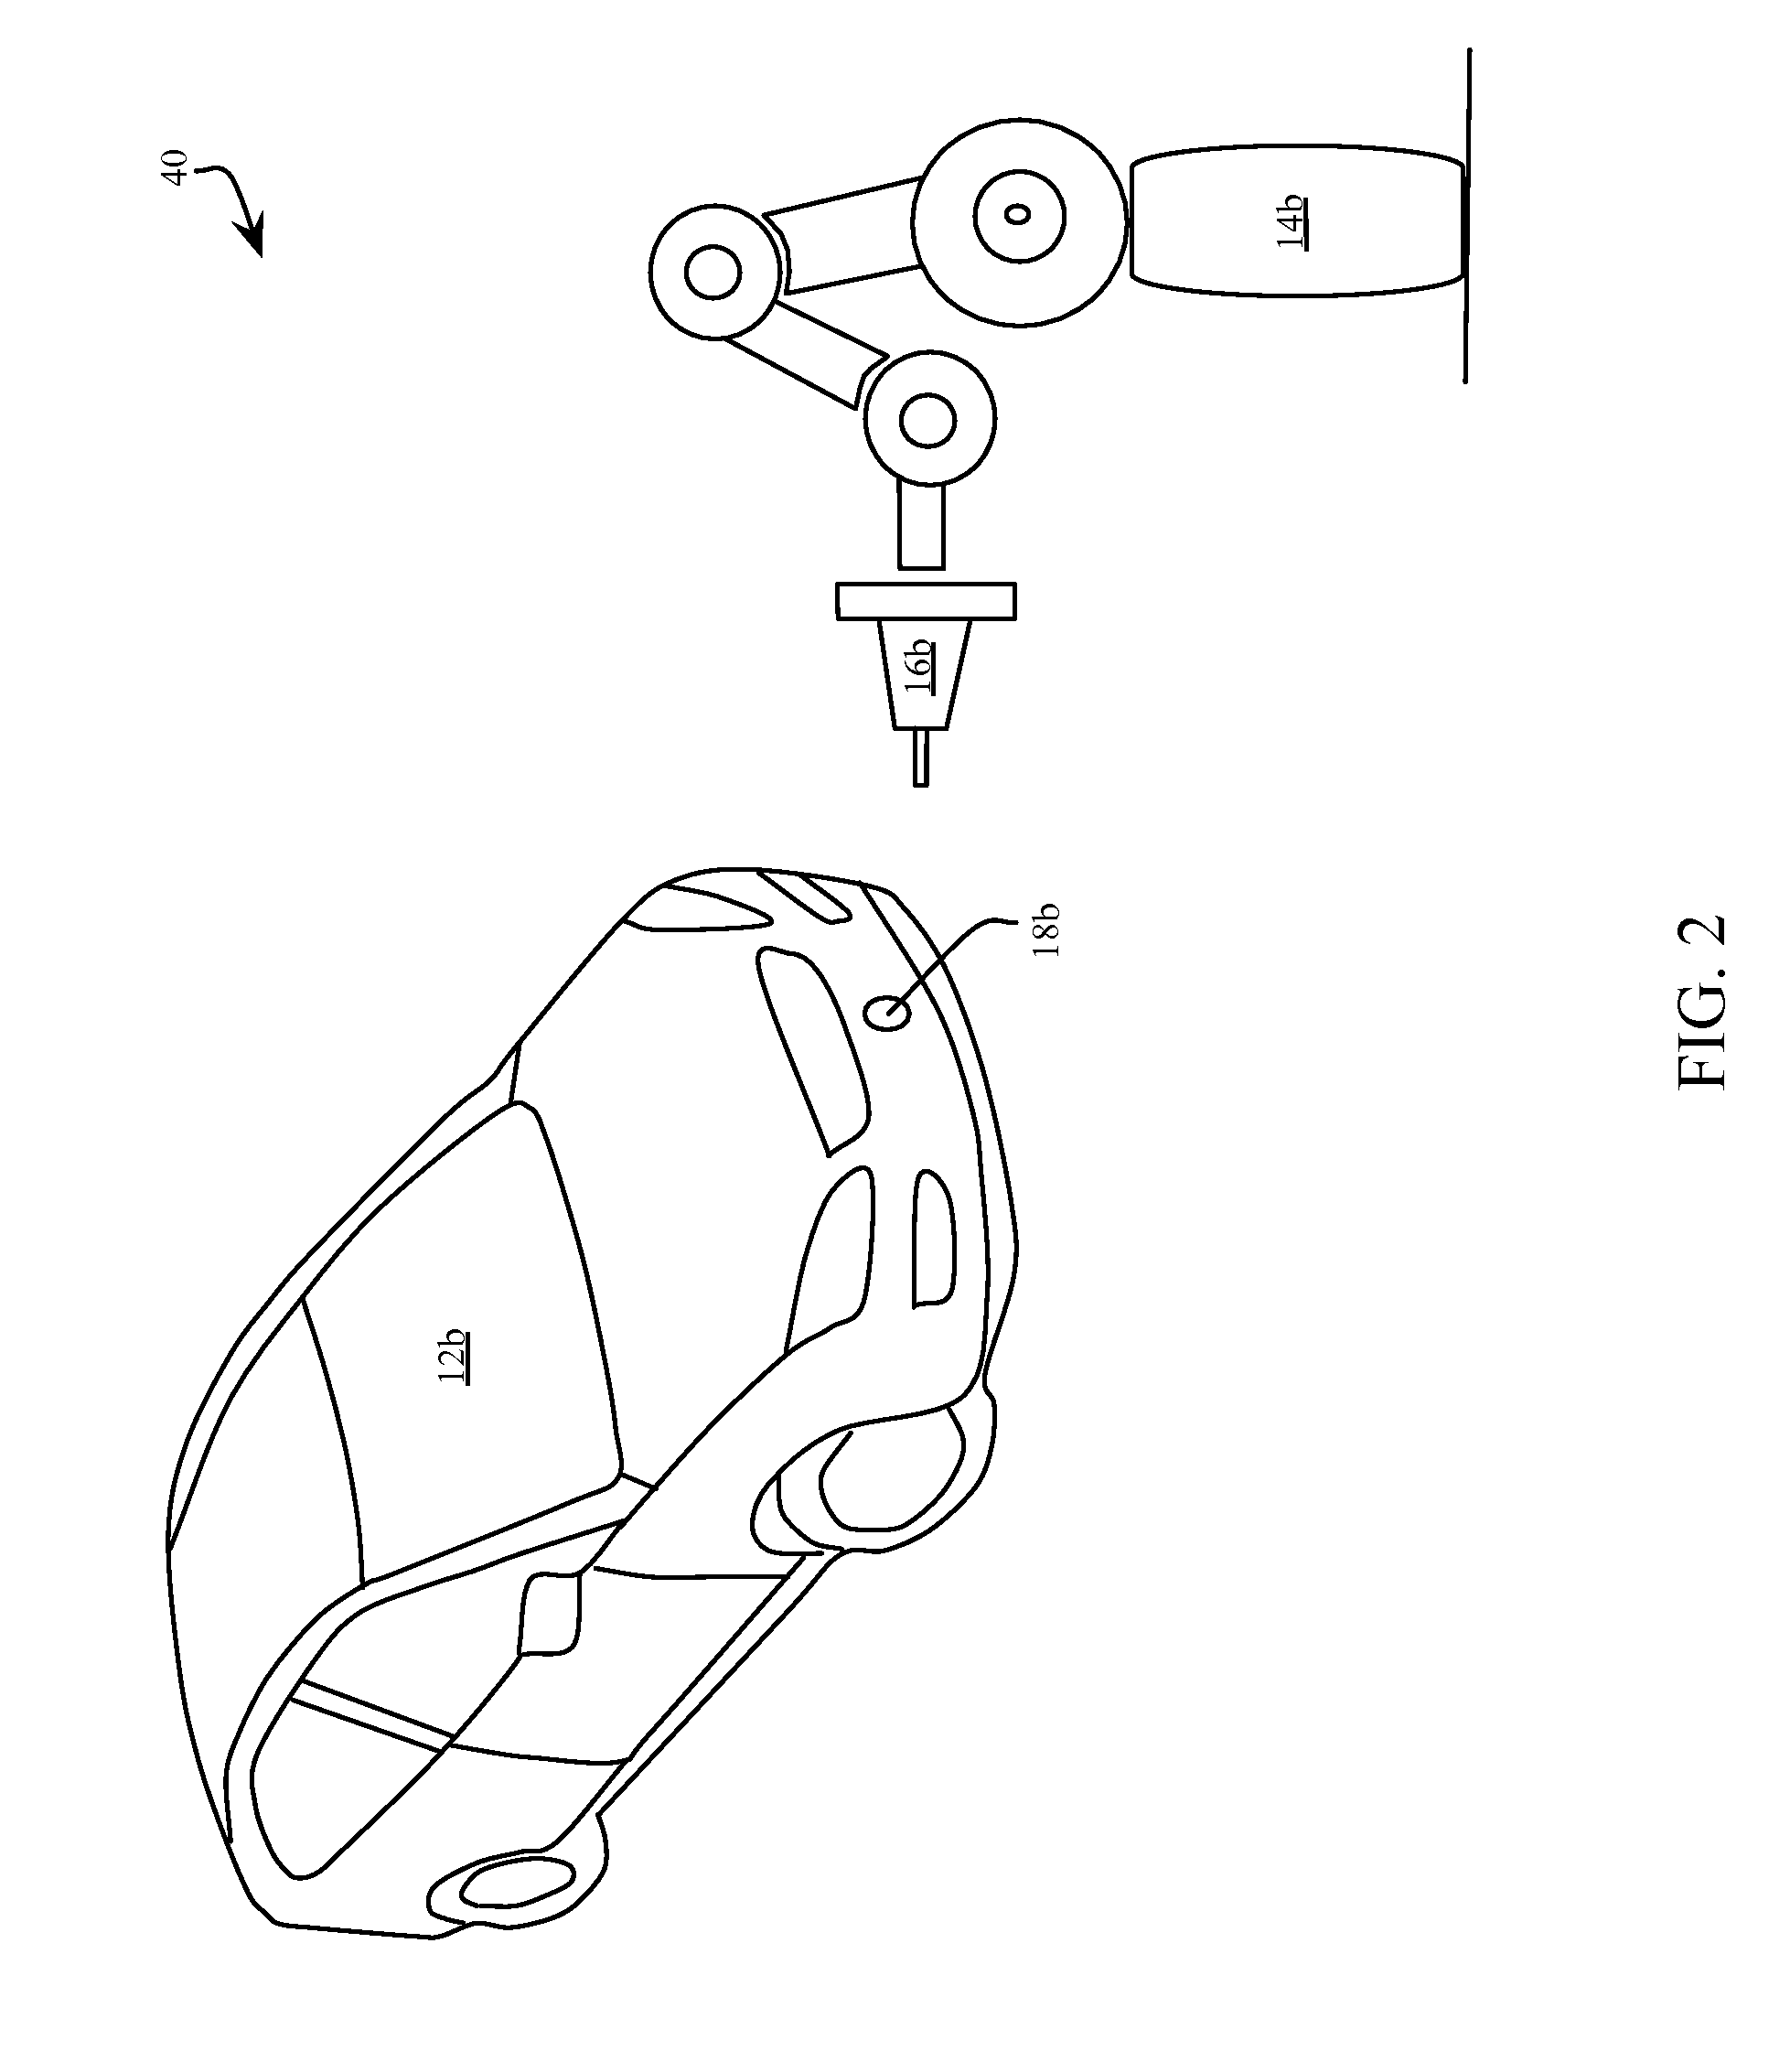 Method and system for charging electric vehicles